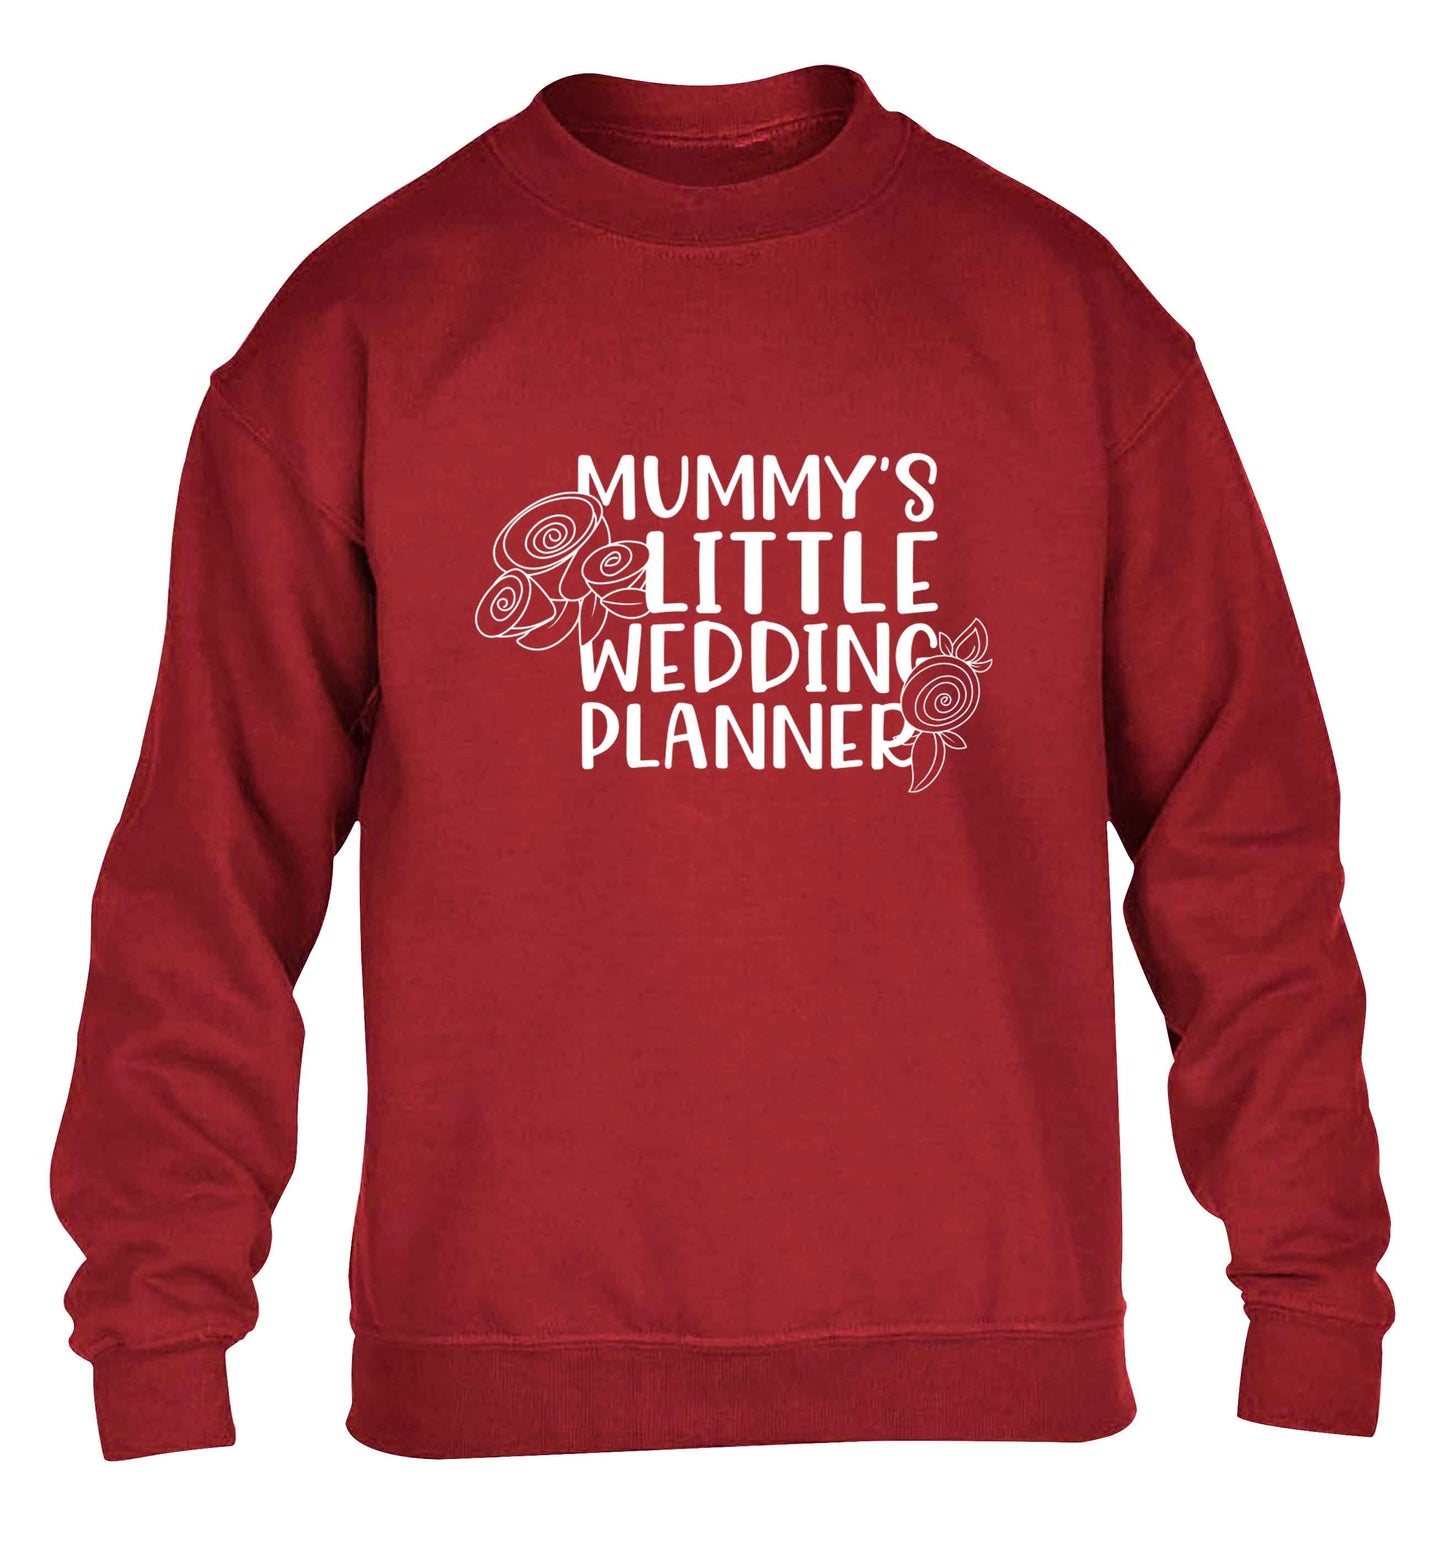 adorable wedding themed gifts for your mini wedding planner! children's grey sweater 12-13 Years